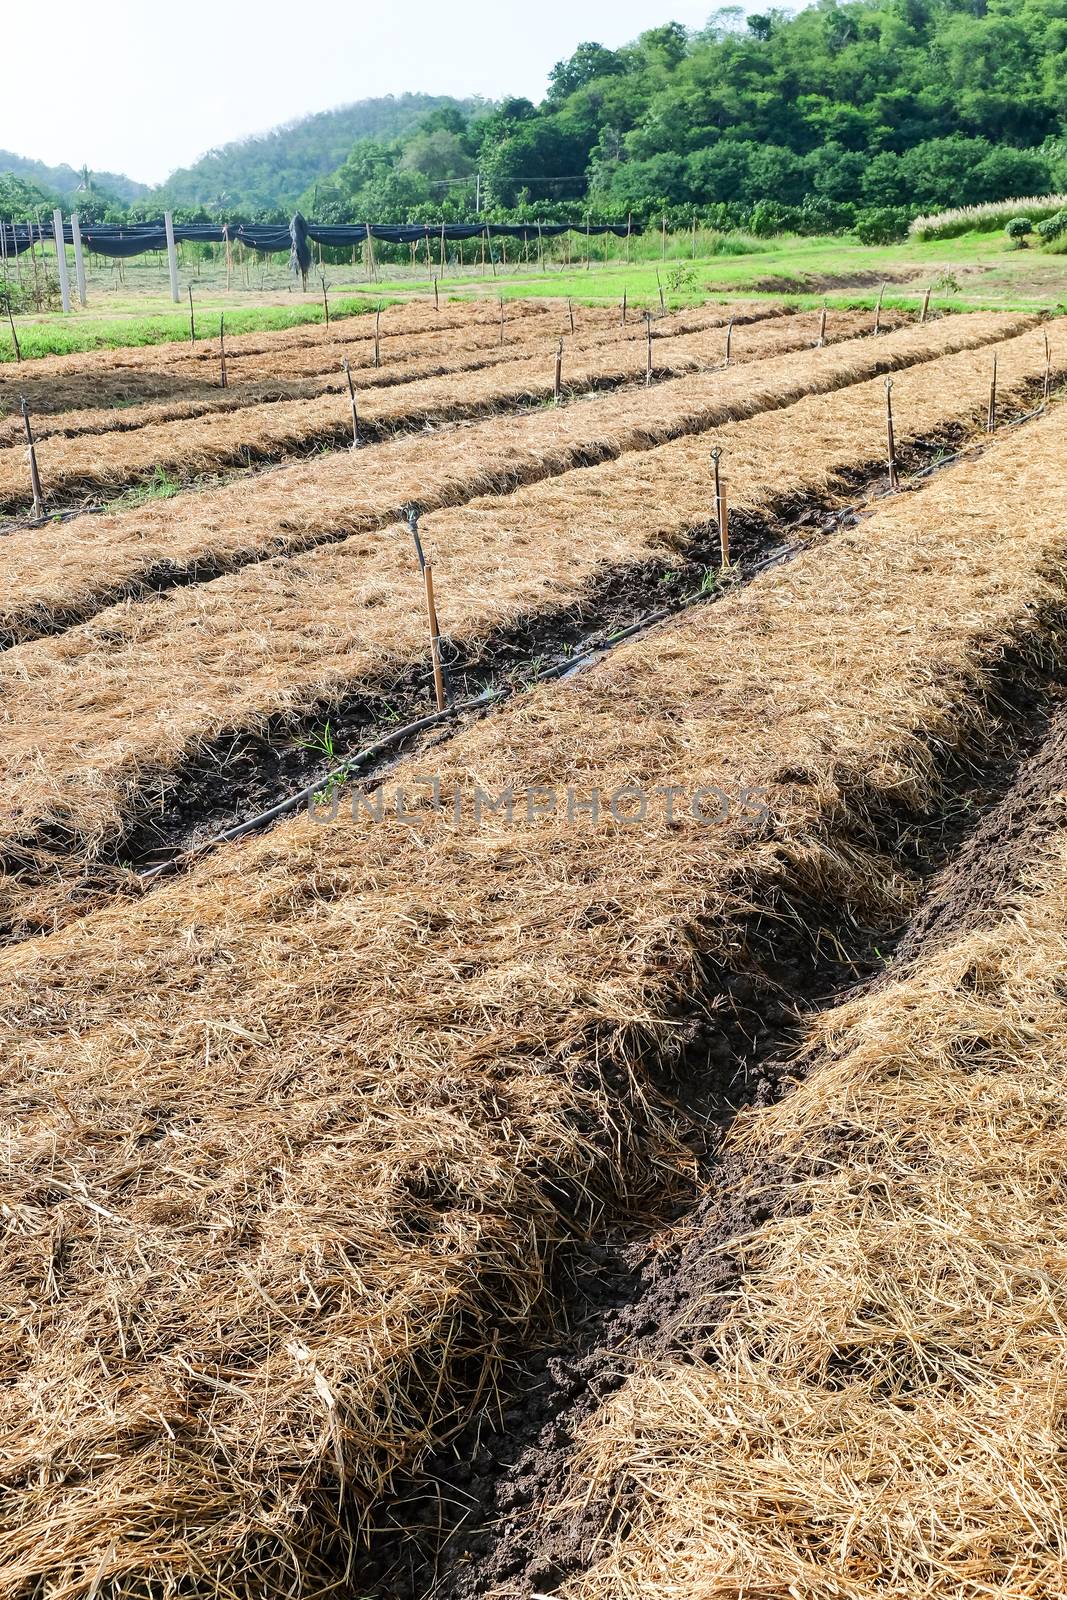 Preparing soil for plantation, Vegetable plots,Straw cover crop cultivated soil